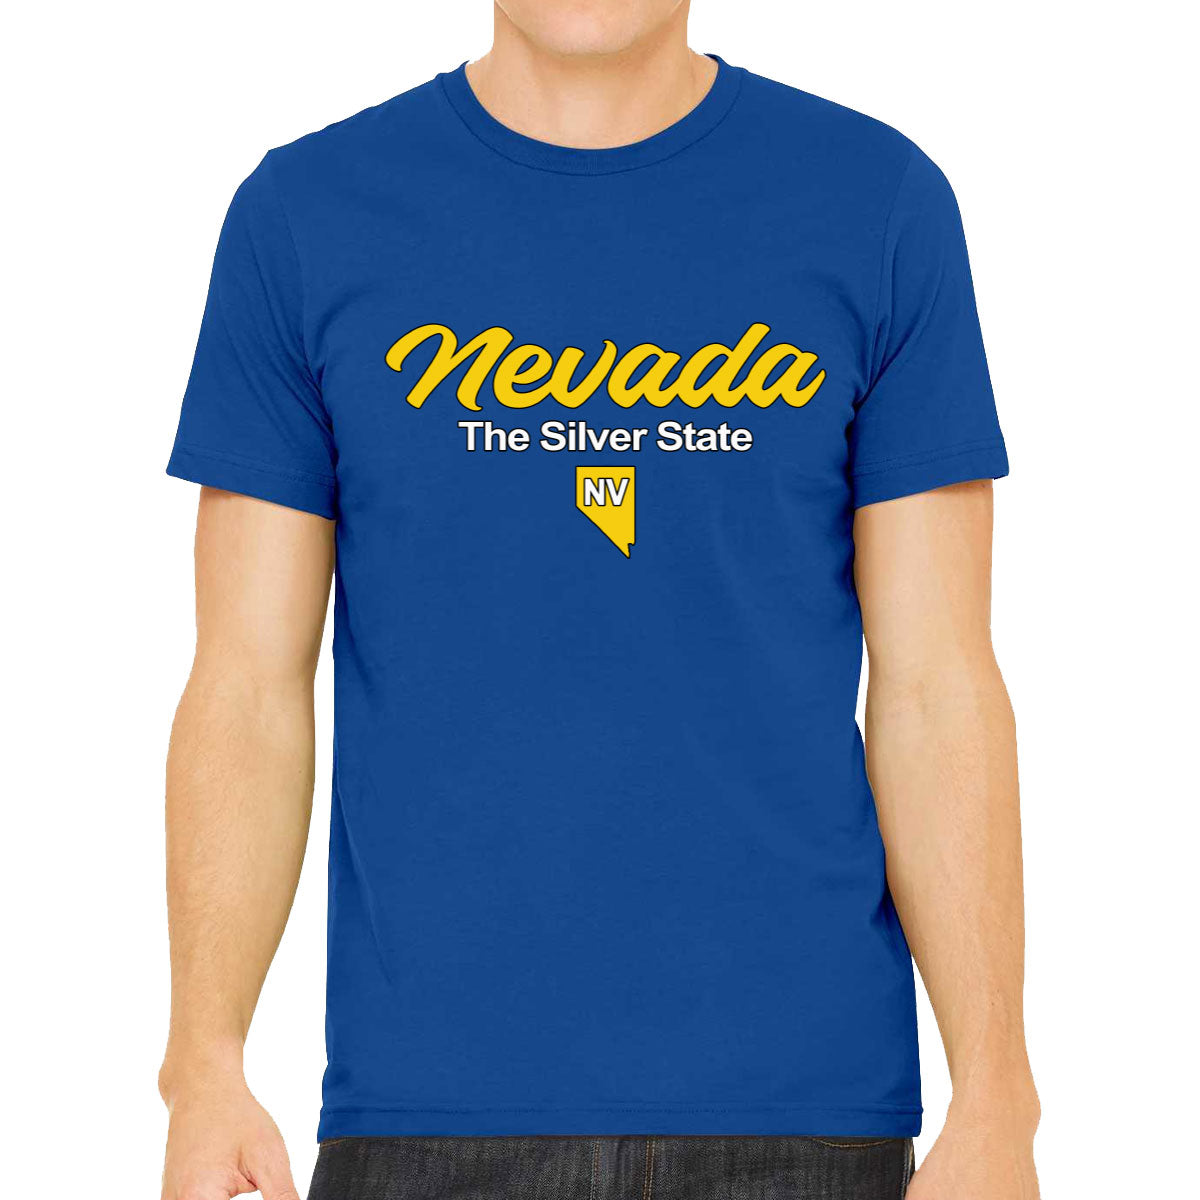 Nevada The Silver State Men's T-shirt